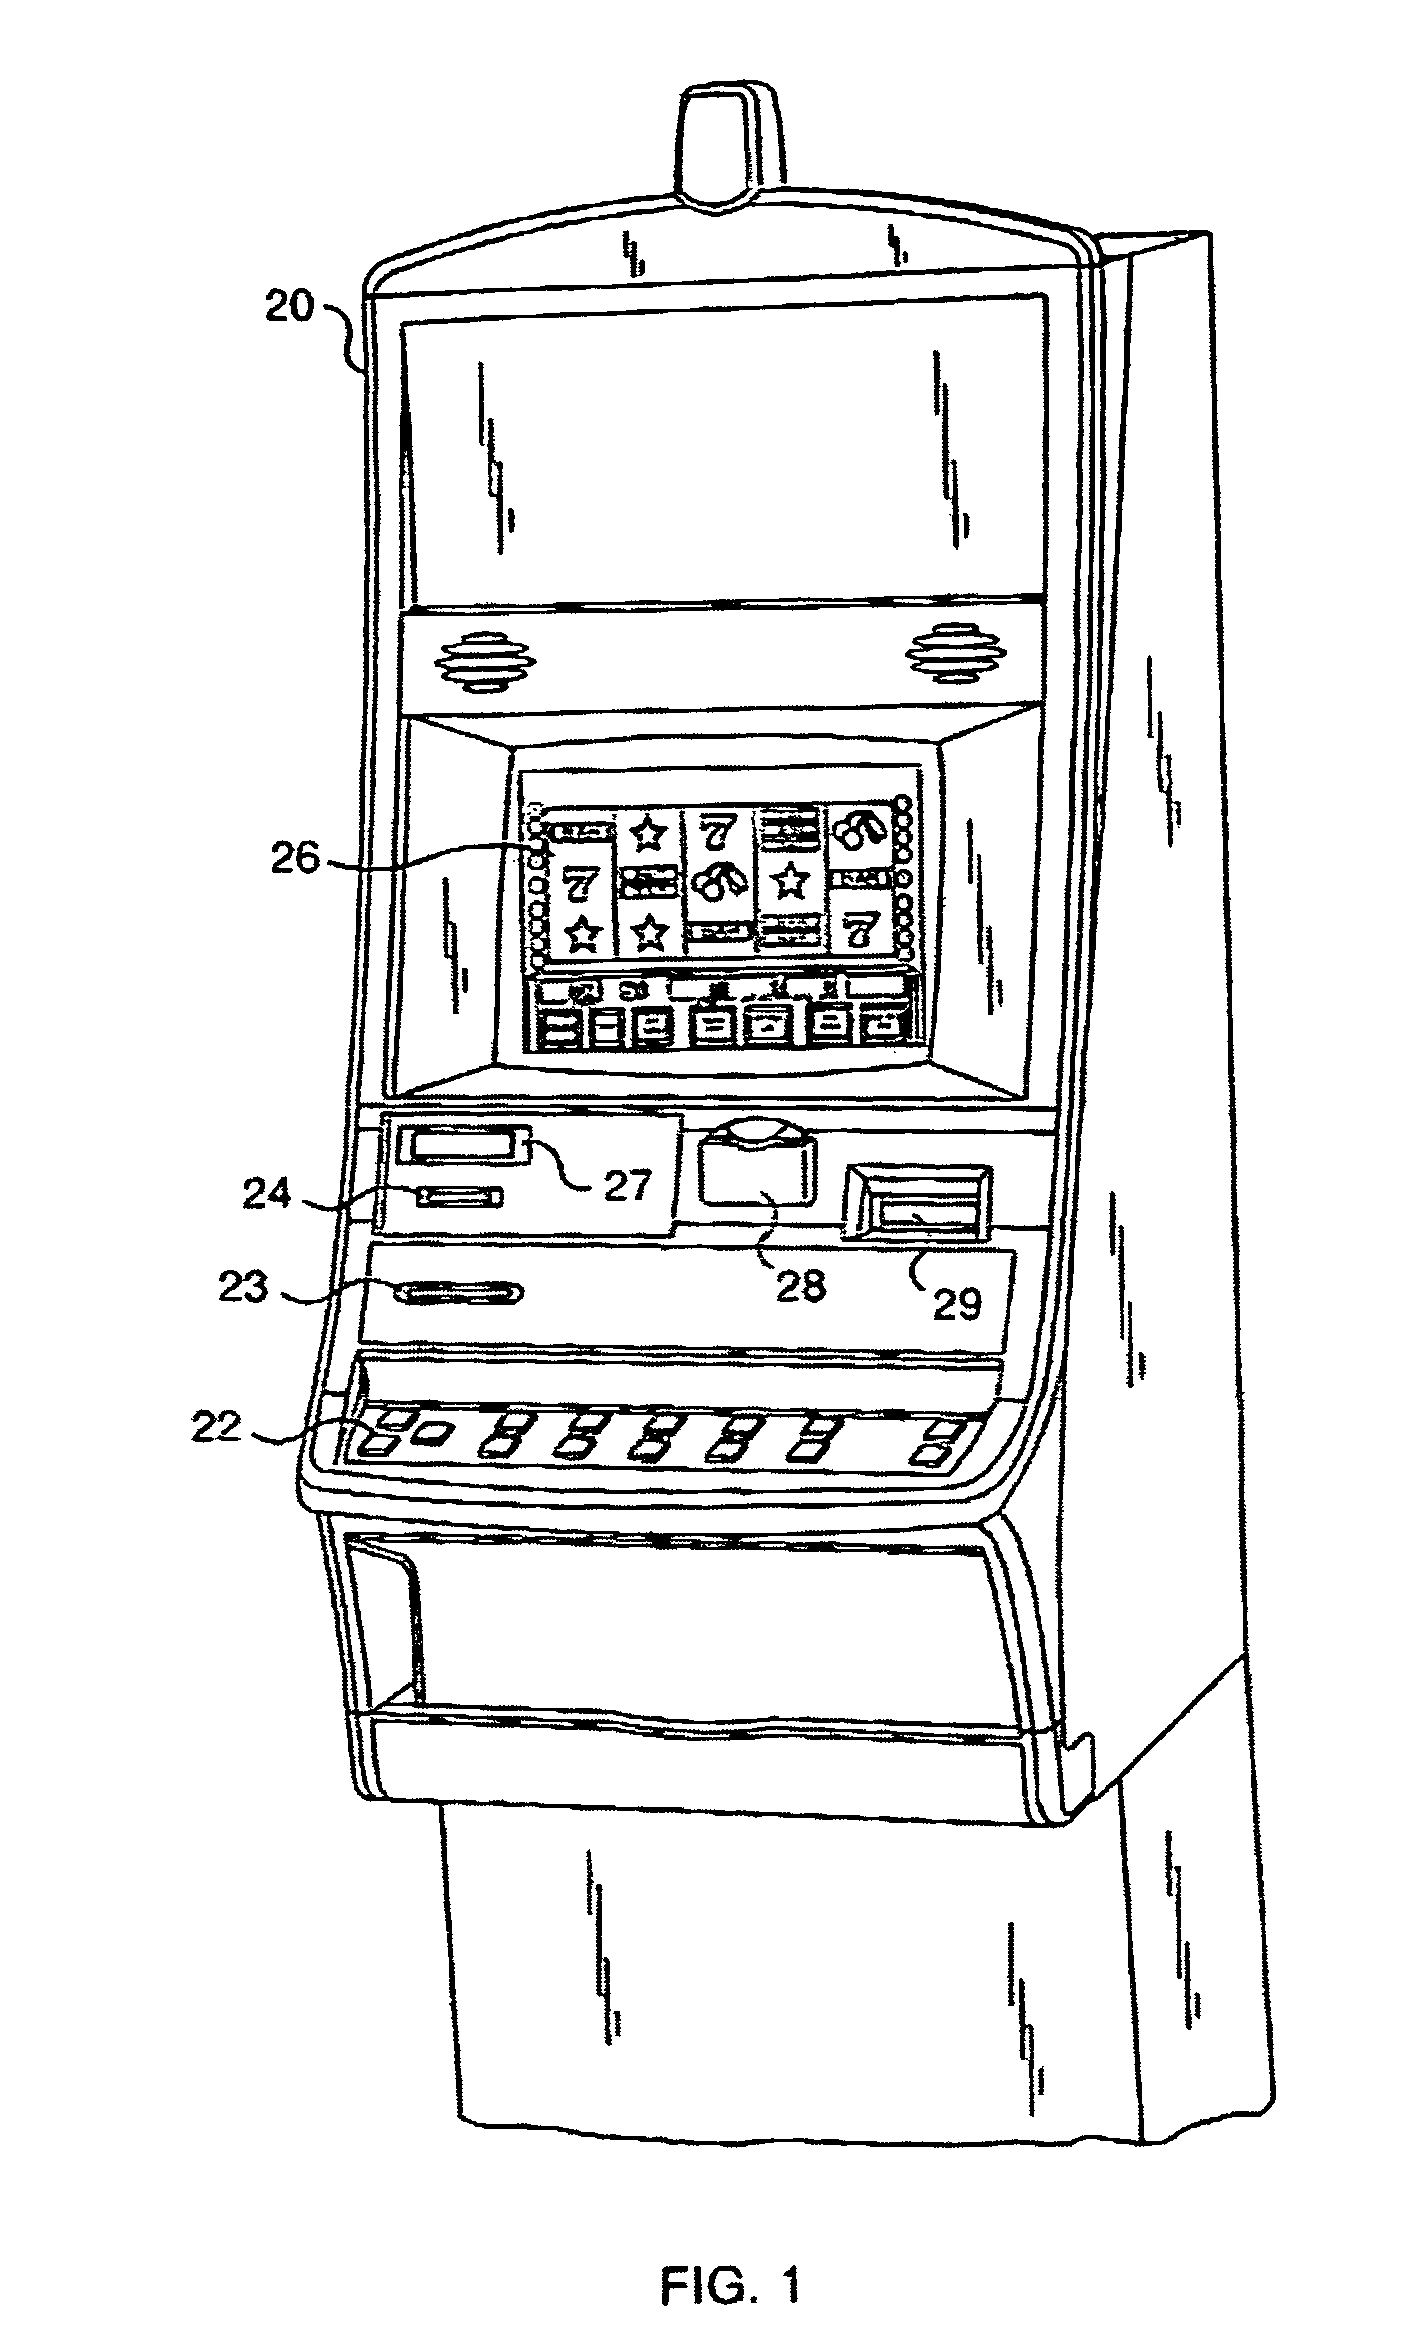 Method and apparatus for a gaming network architecture